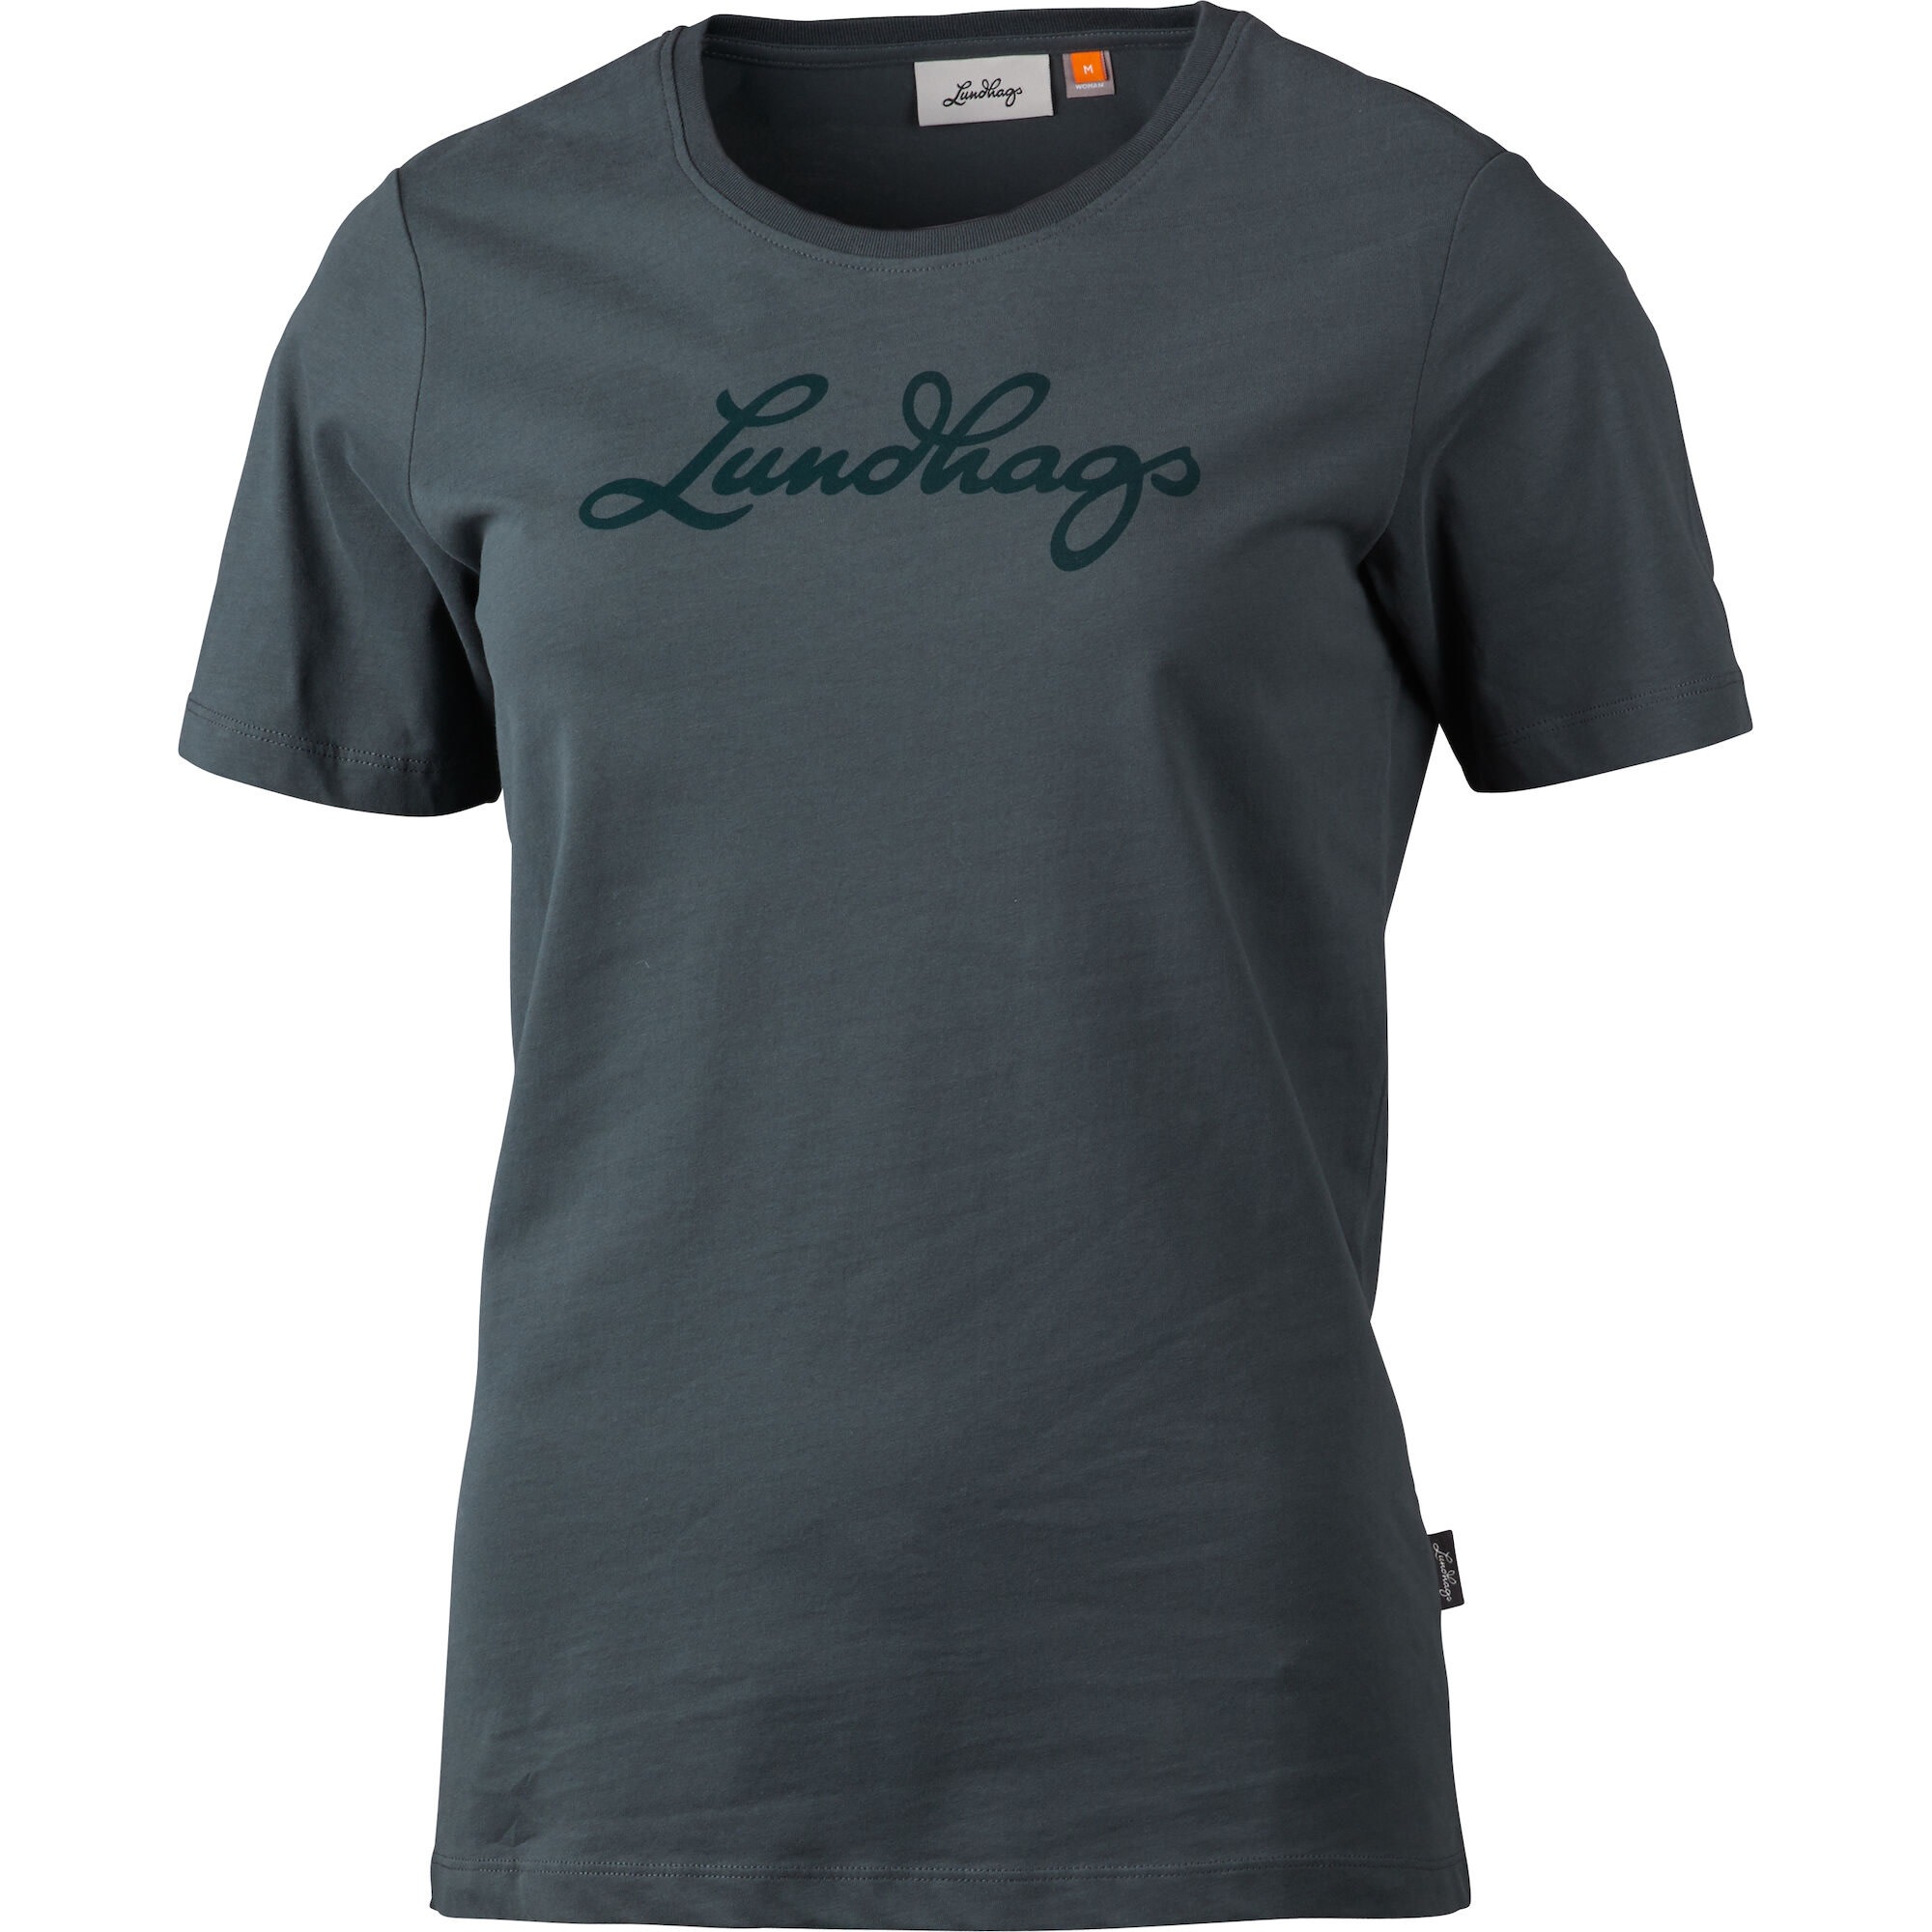 Lundhags Women’s Lundhags Tee Dk Agave